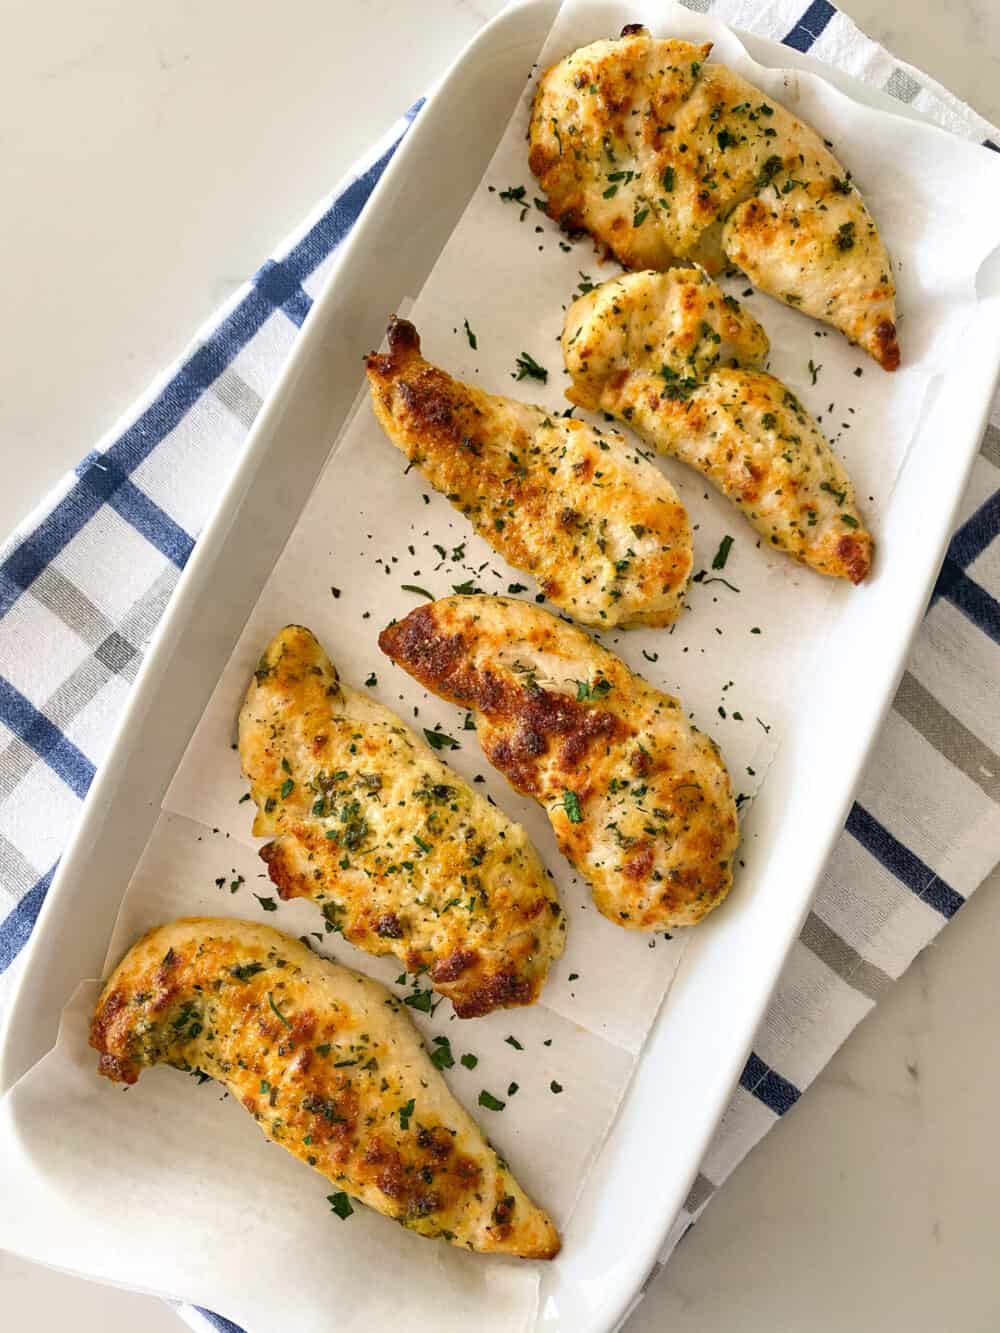 finished baked chicken tenders on serving plate